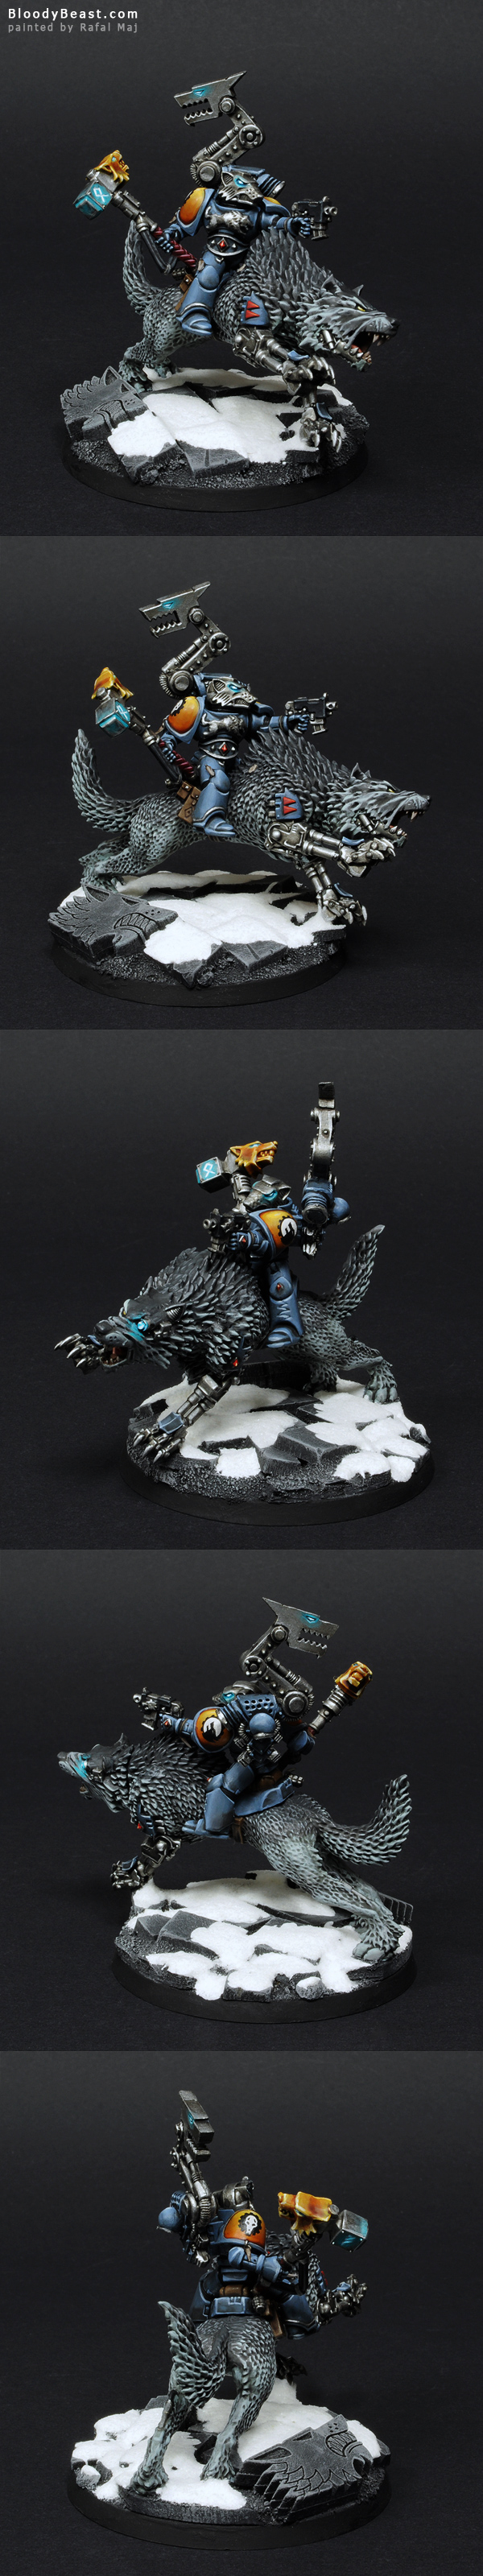 Space Wolves Iron Priest On Thunderwolf painted by Rafal Maj (BloodyBeast.com)